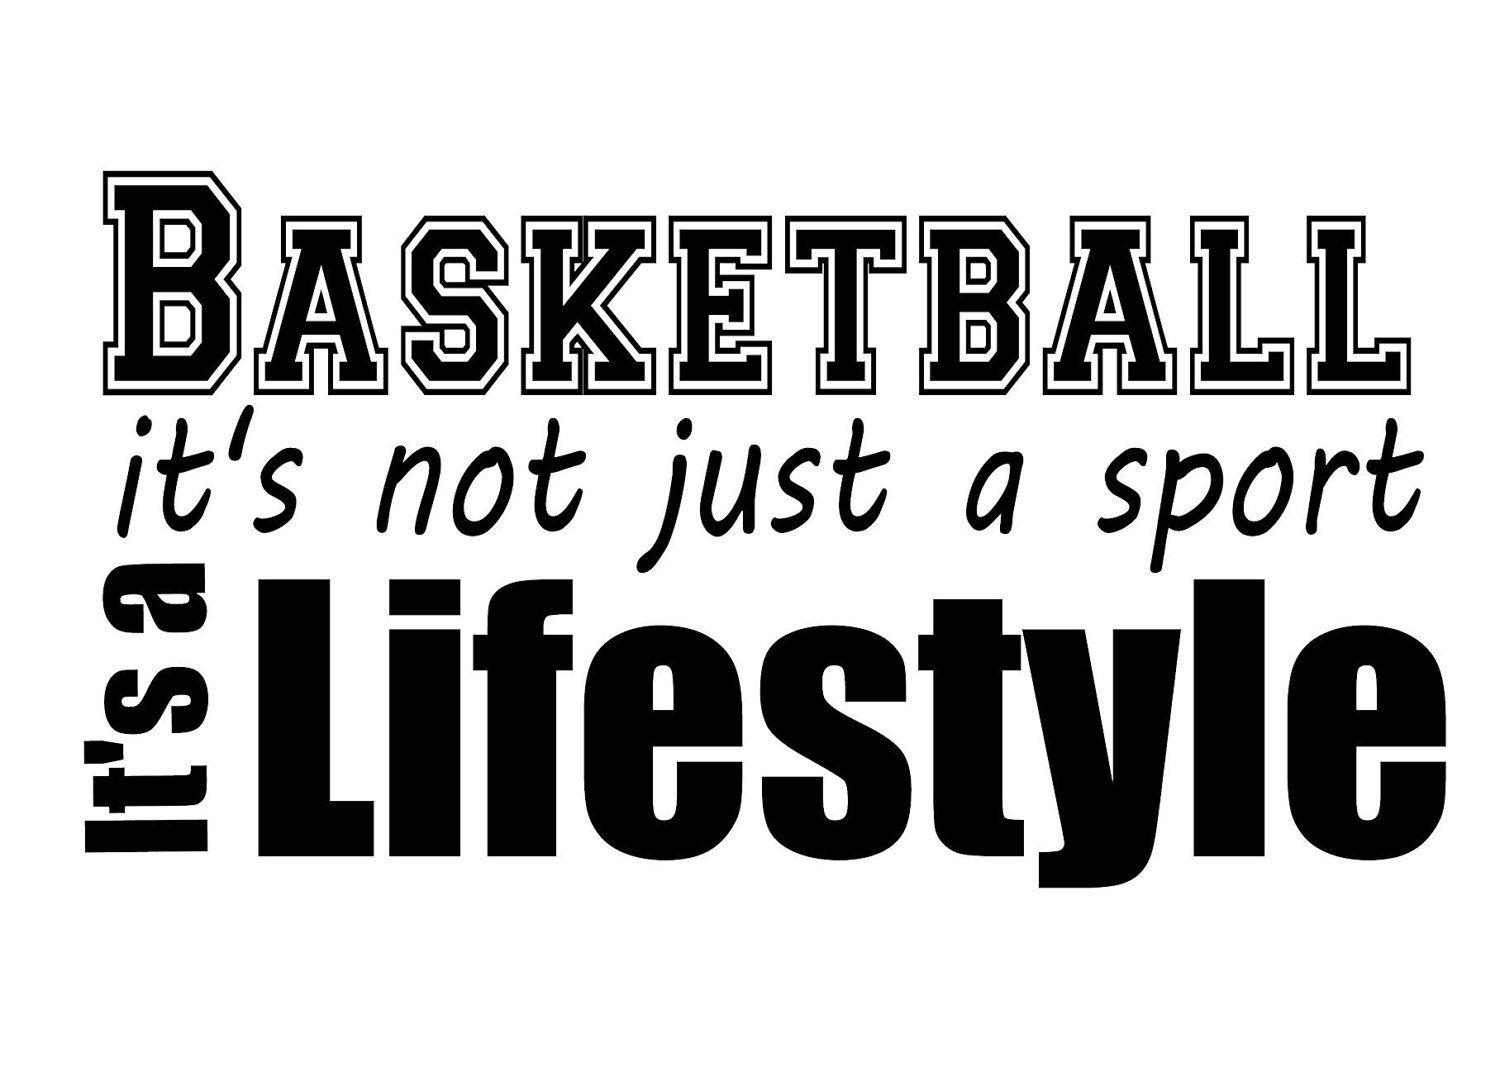 Basketball Quotes Wallpaper High Definition